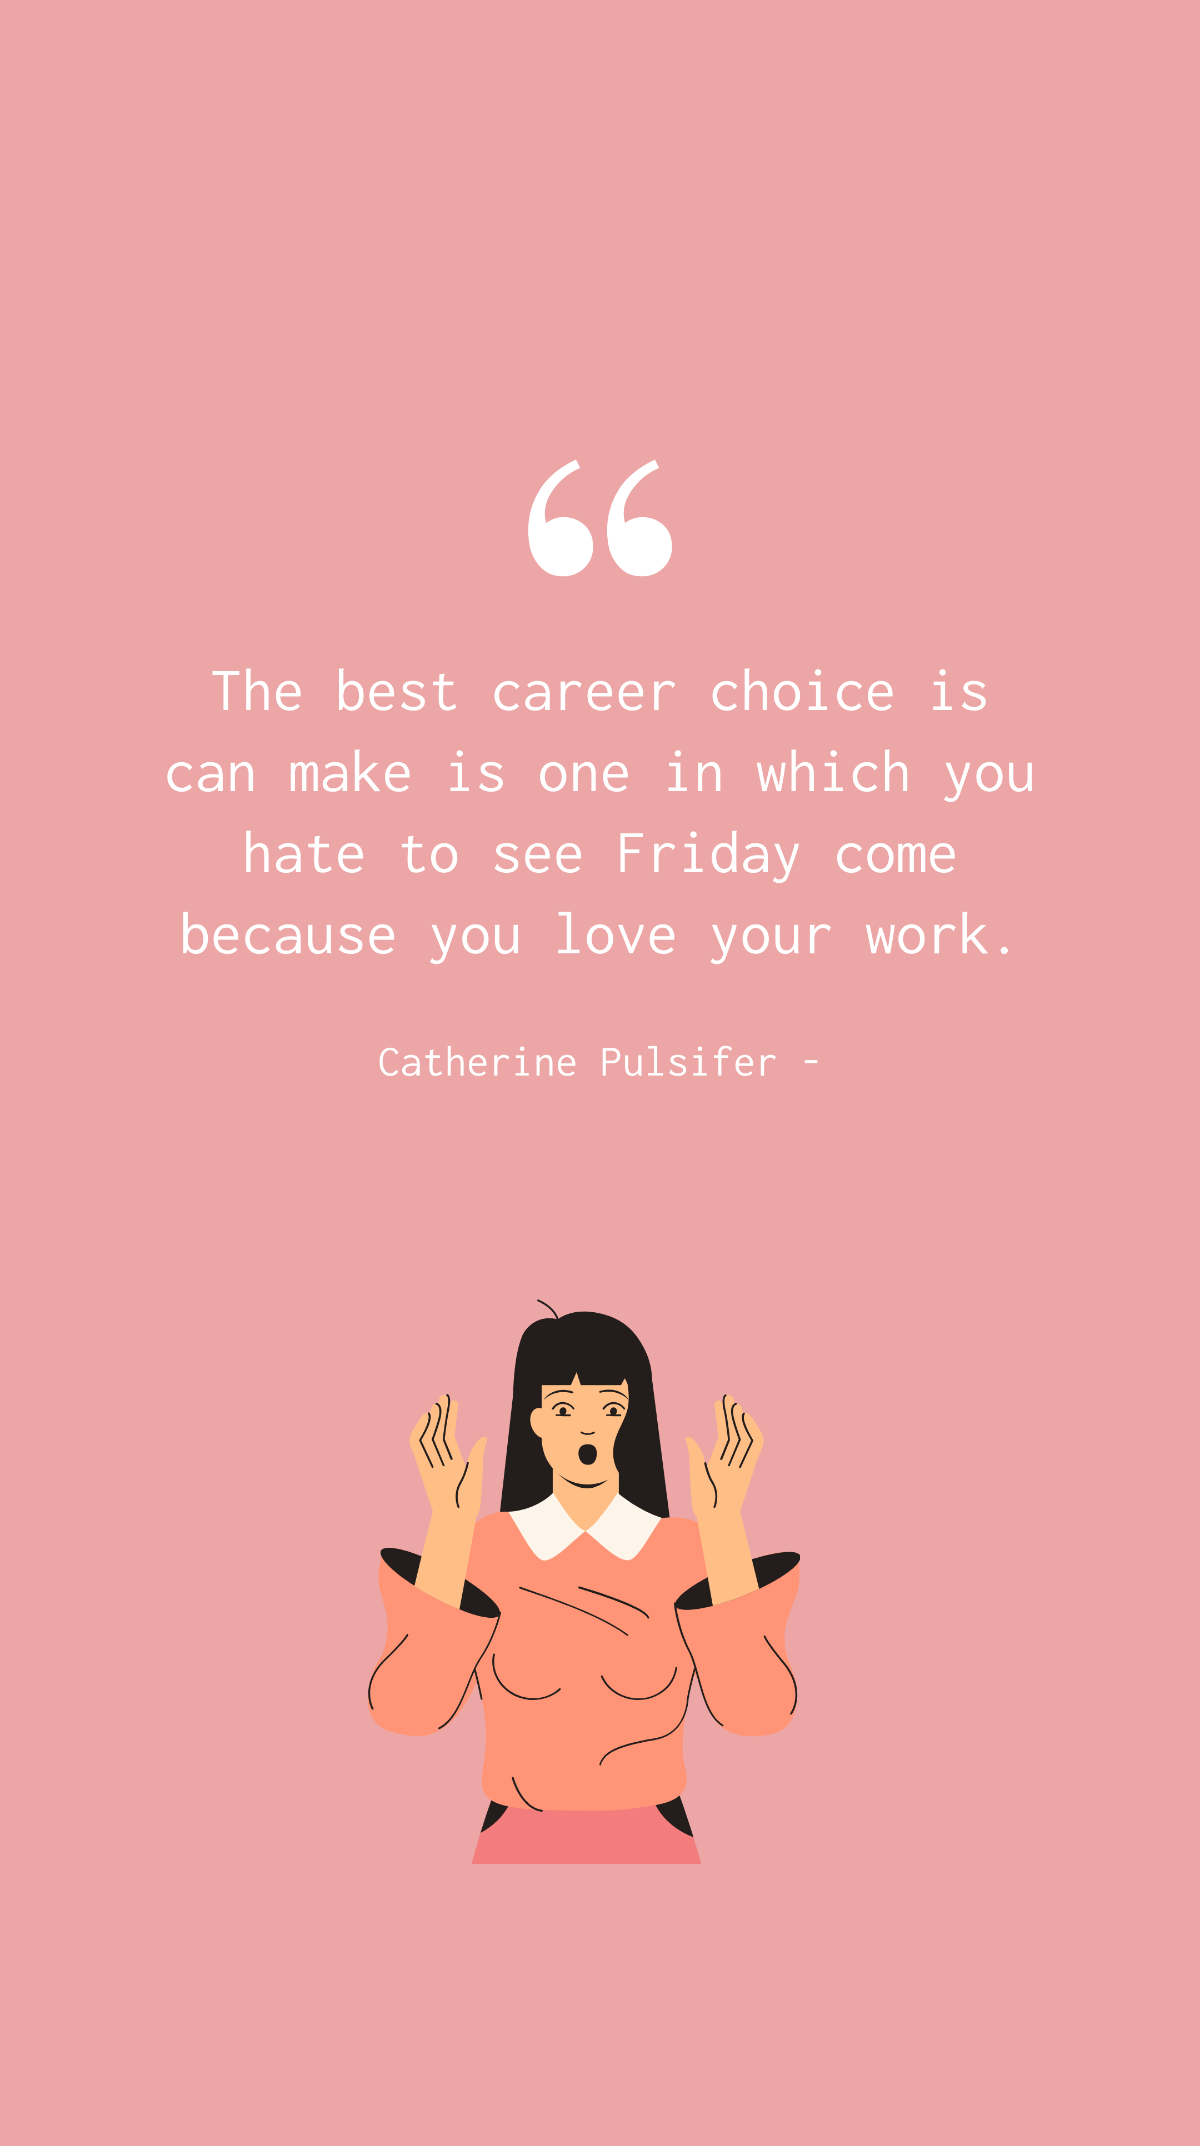 Catherine Pulsifer - The best career choice is can make is one in which you hate to see Friday come because you love your work. Template